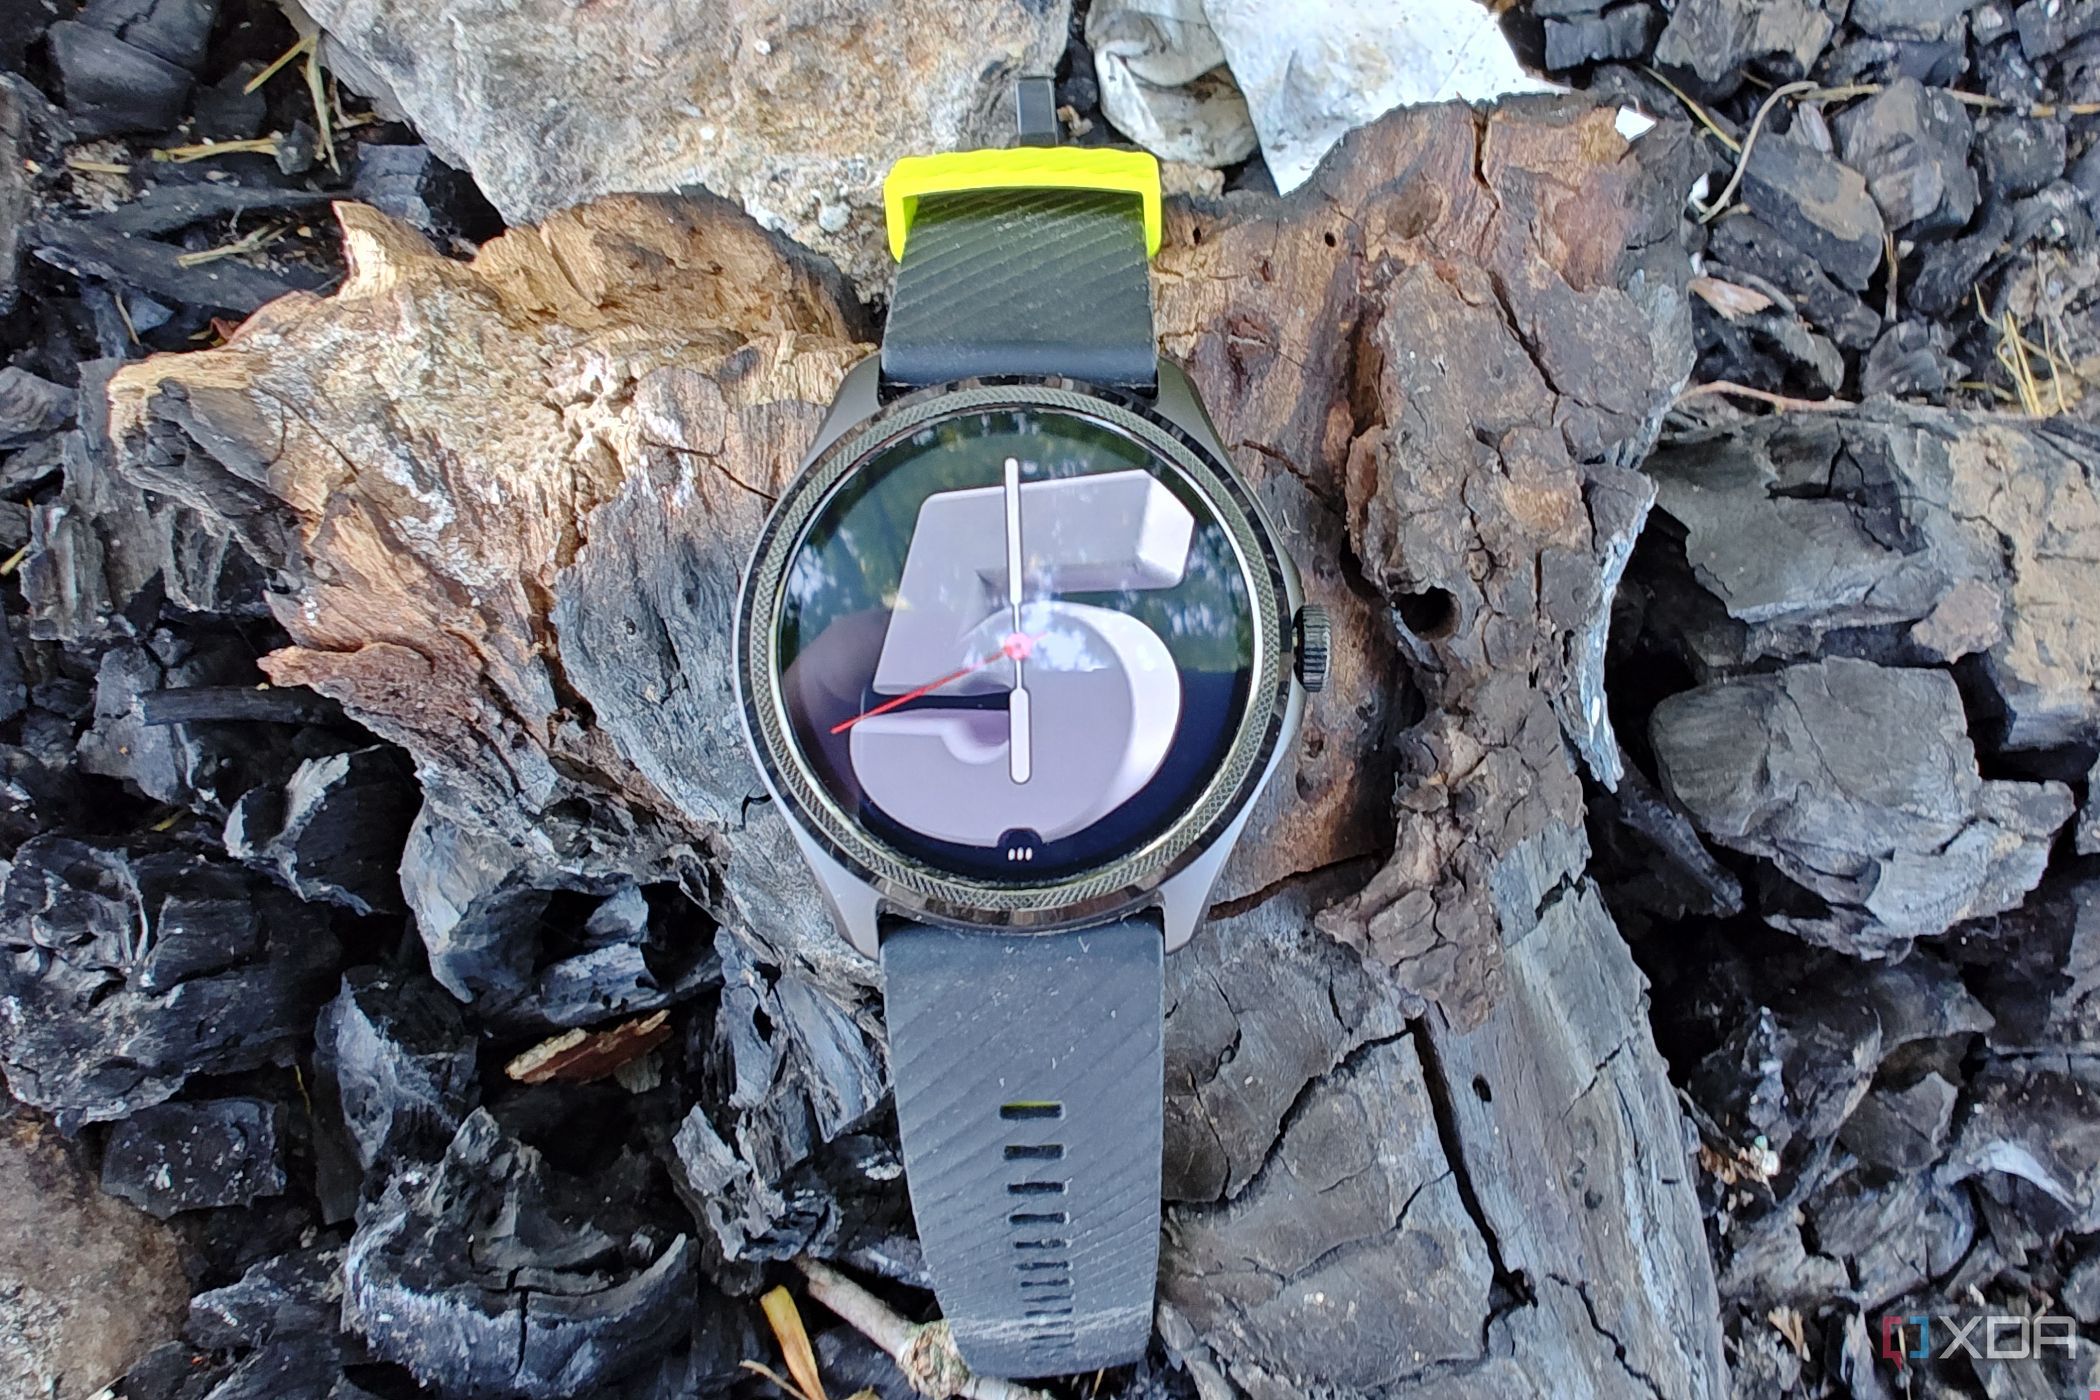 TicWatch Pro 5 in the test: This smartwatch is a real Wear OS endurance  runner!